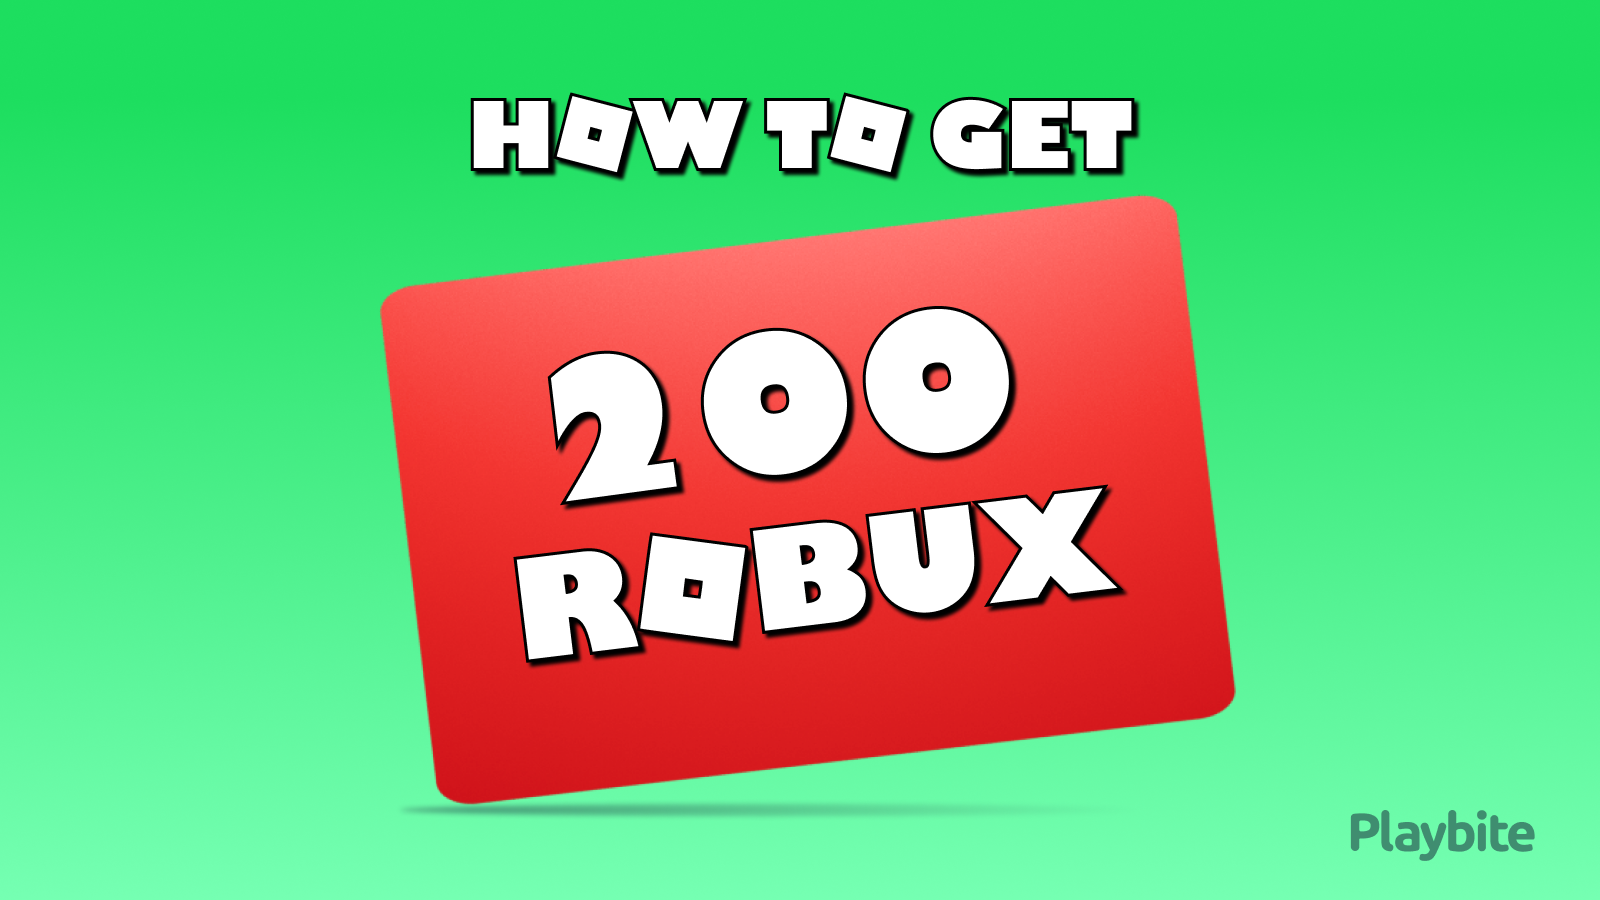 Roblox Gift Card, $10 to $200